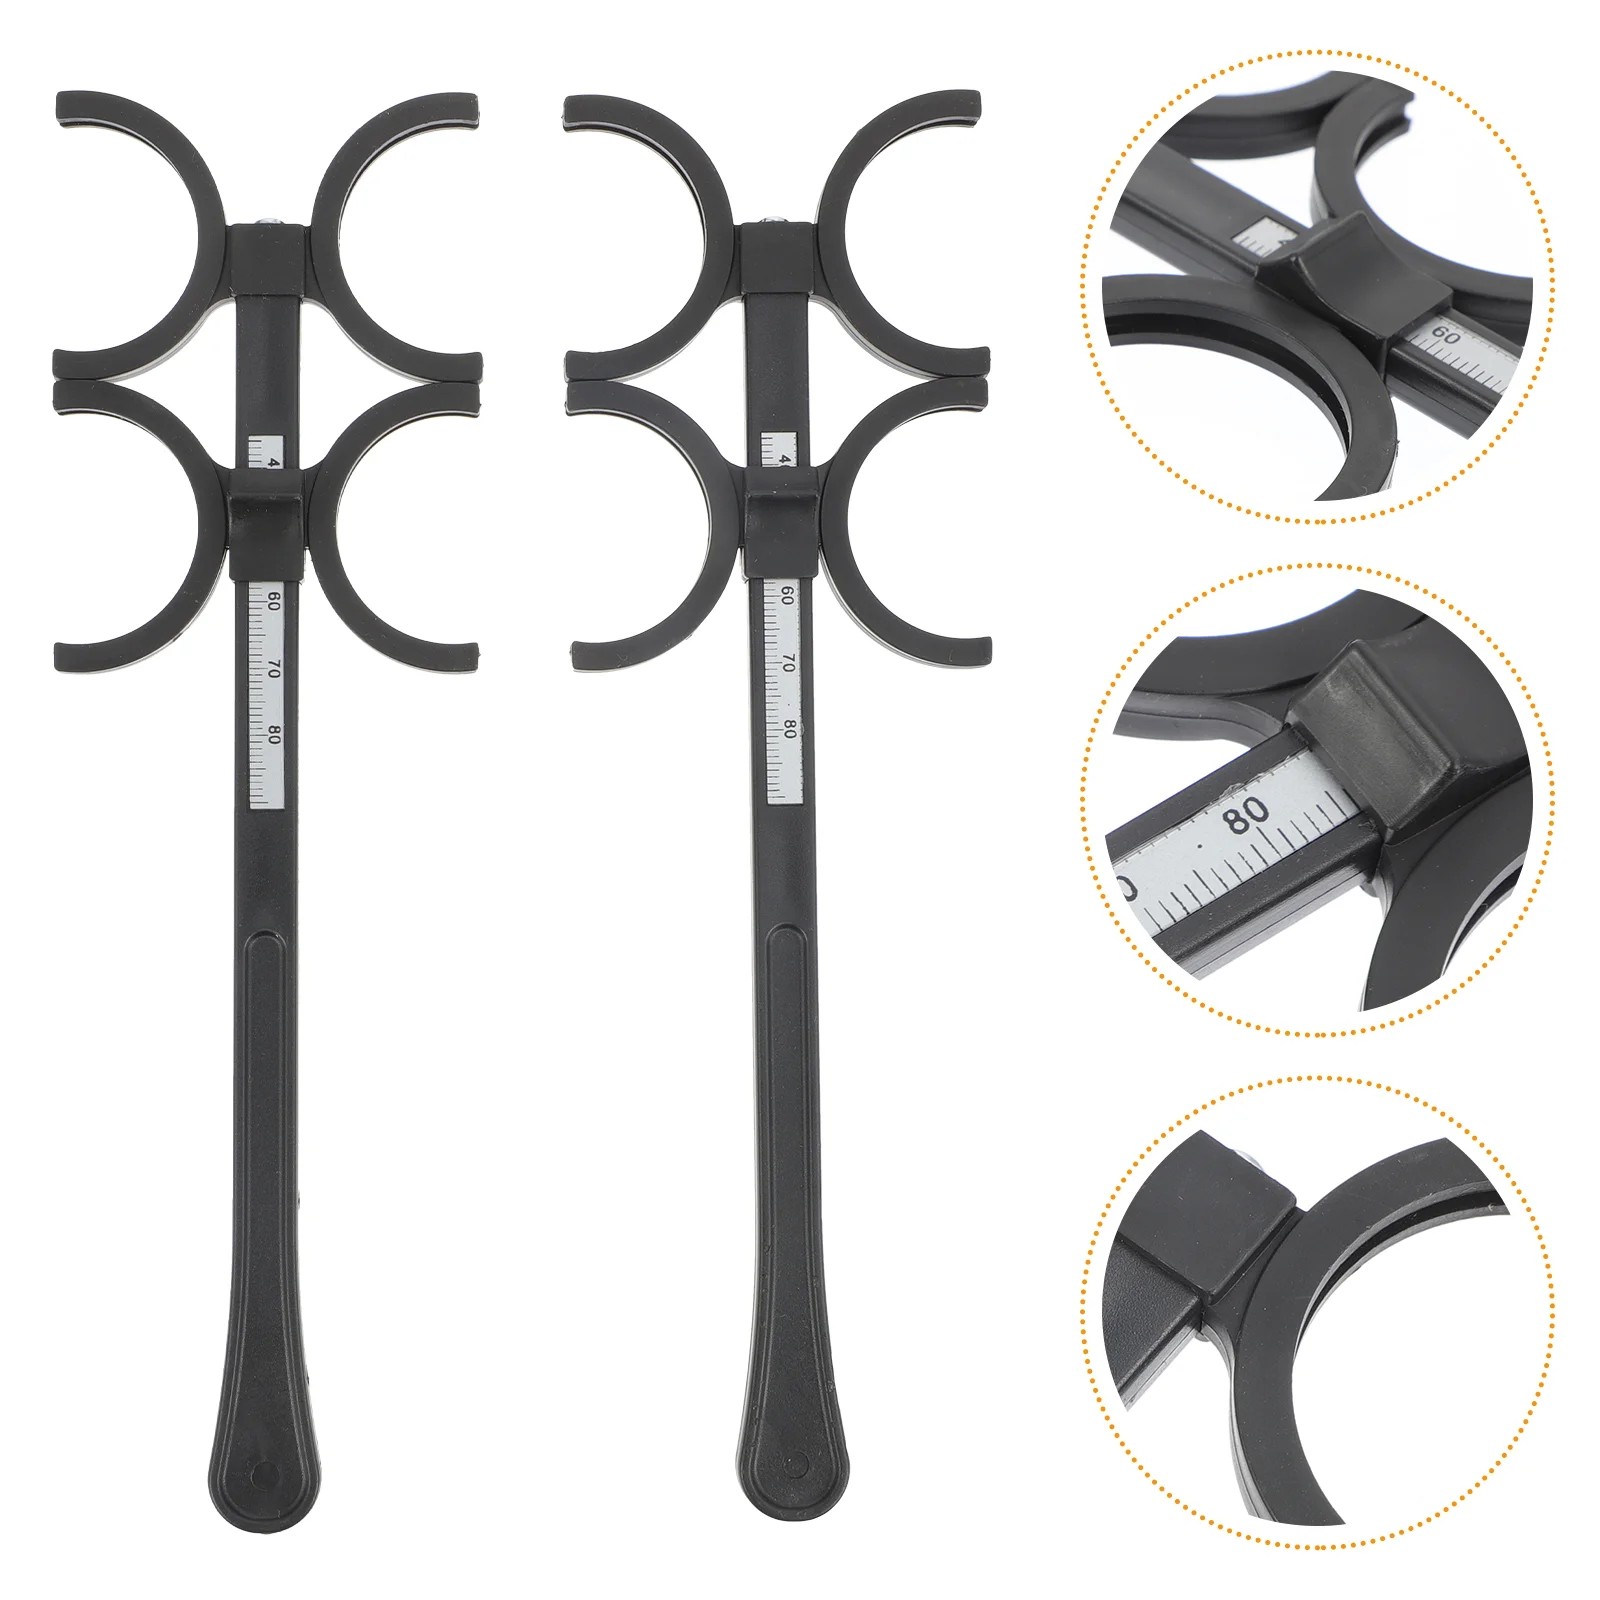 

2 Pcs Glasses Accessories Utensils Optometry Confirmation Flipping Tool Adjustable